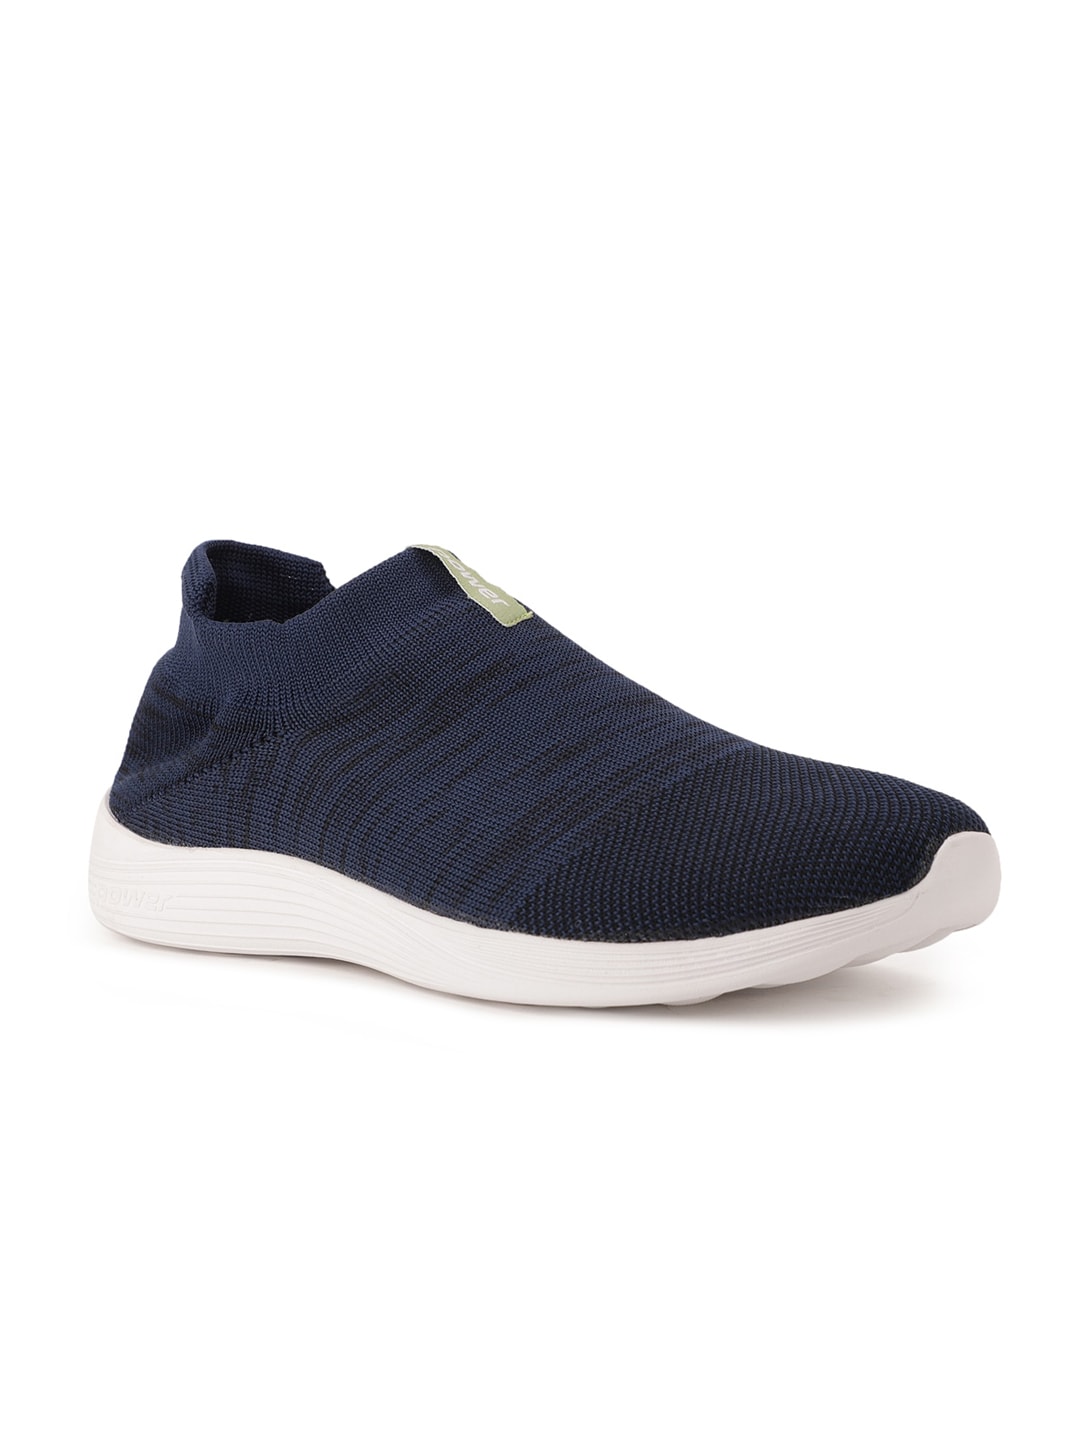 Power Women Blue Woven Design Slip-On Sneakers Price in India